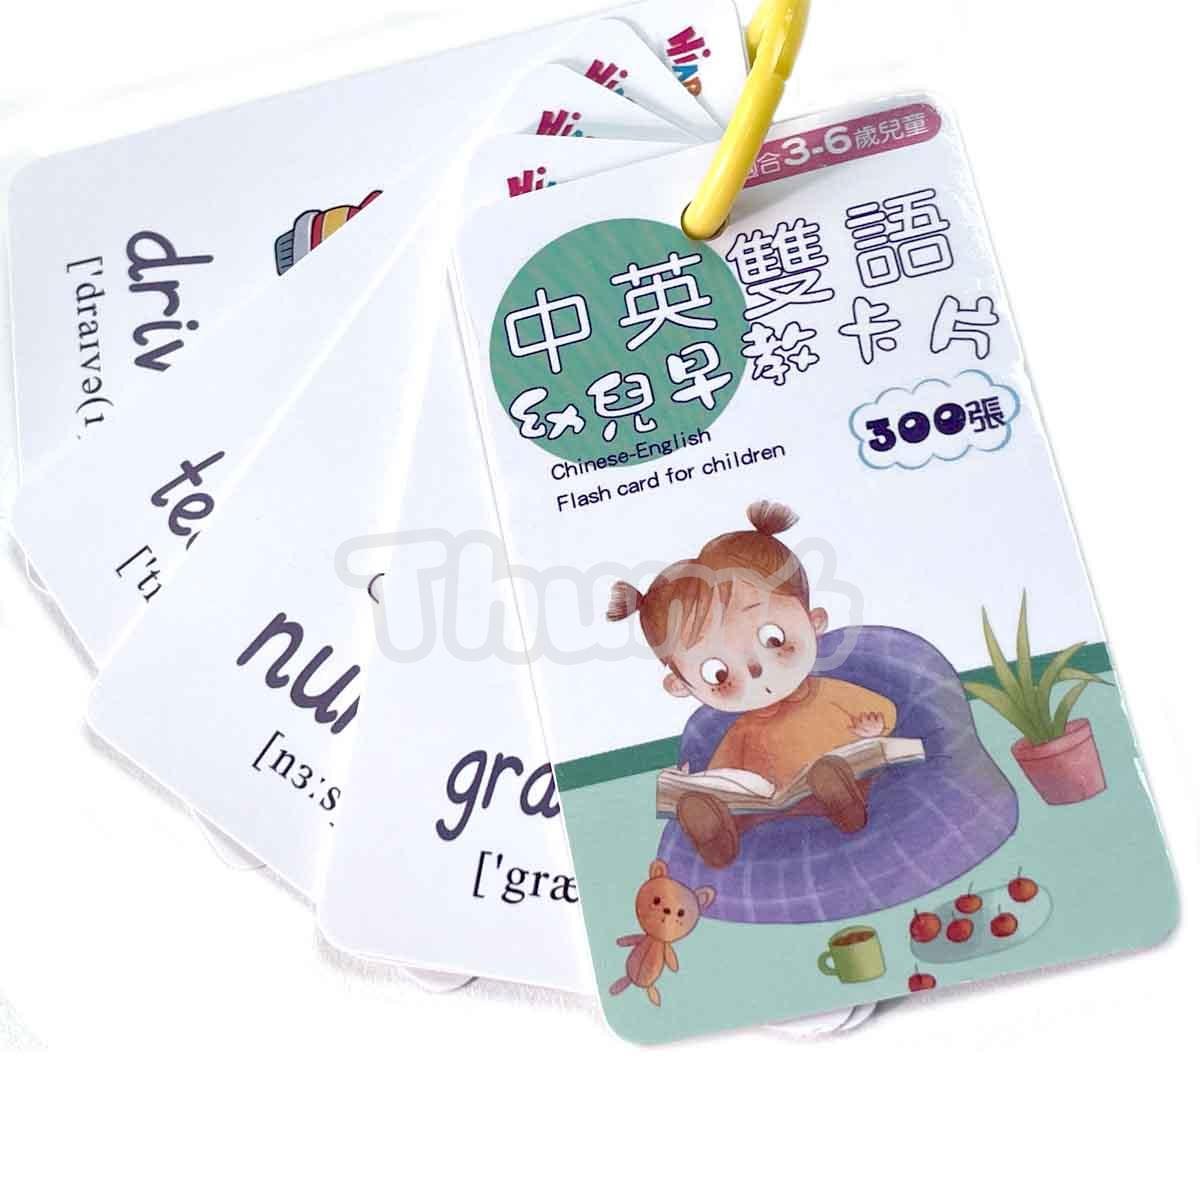 chinese english flash card for childern